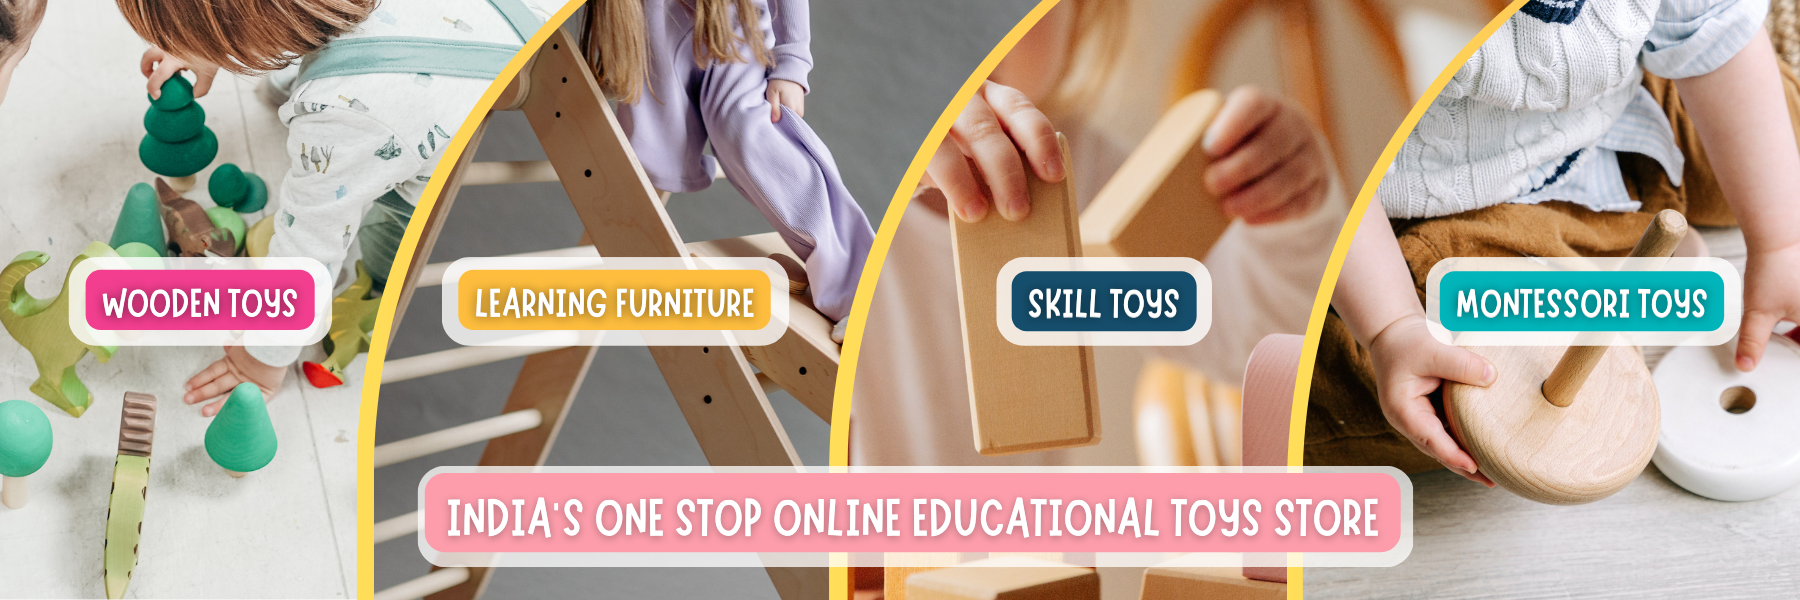 SkilloToys Brings Wooden Toys, Montessori Toys, Learning Furniture based Skill Toys for Kids